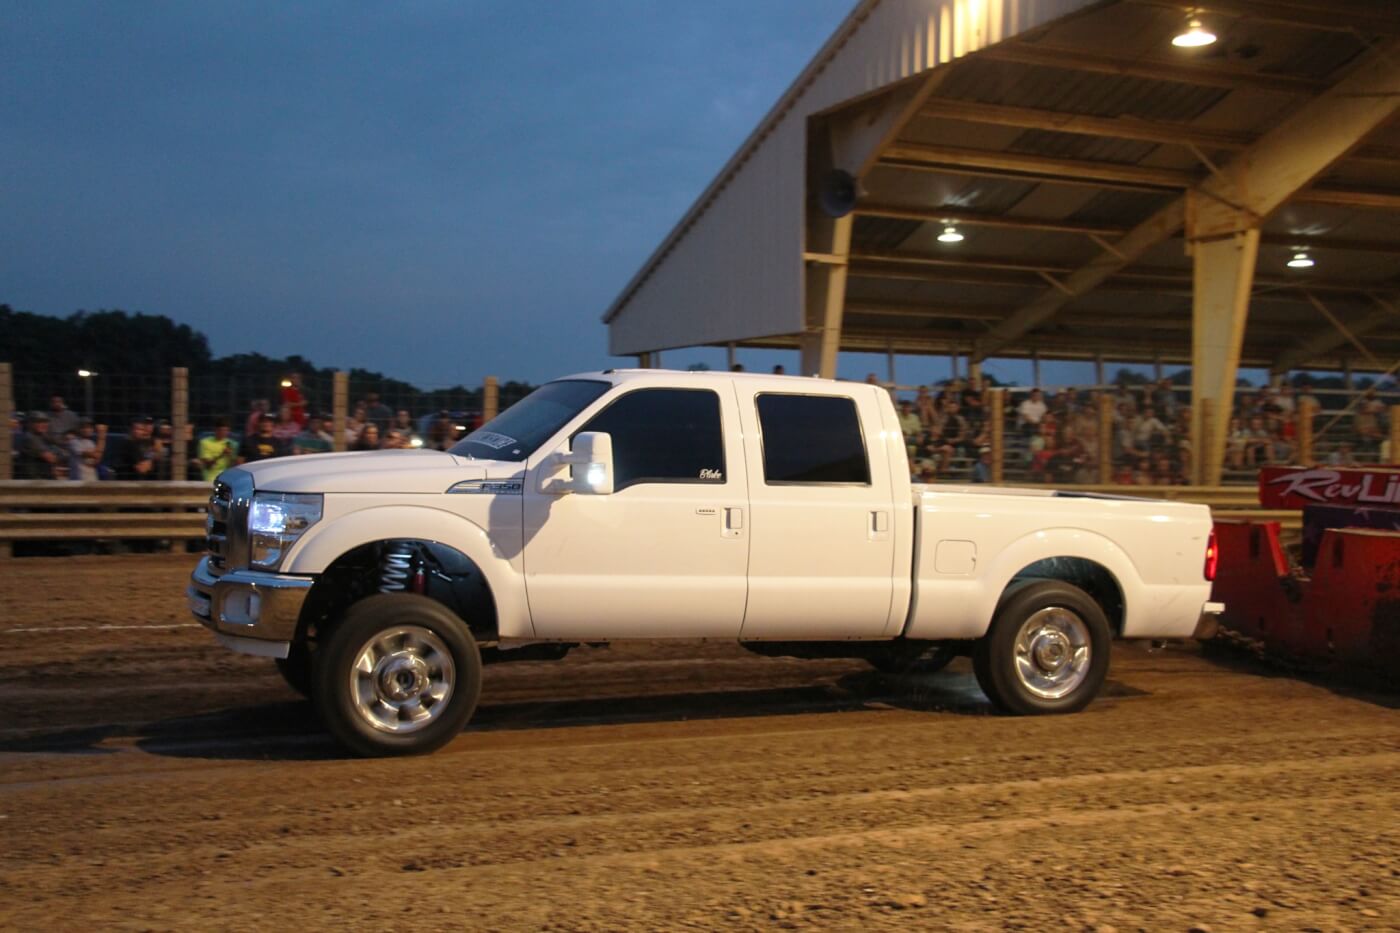 With River City Diesel (primarily a Power Stroke shop) hosting the truck pull, there was no shortage in Blue Ovals turning out to compete. Blake Beauford piloted one of the newer trucks in attendance, his ’12 F-250, to the 9th spot in Work Stock.